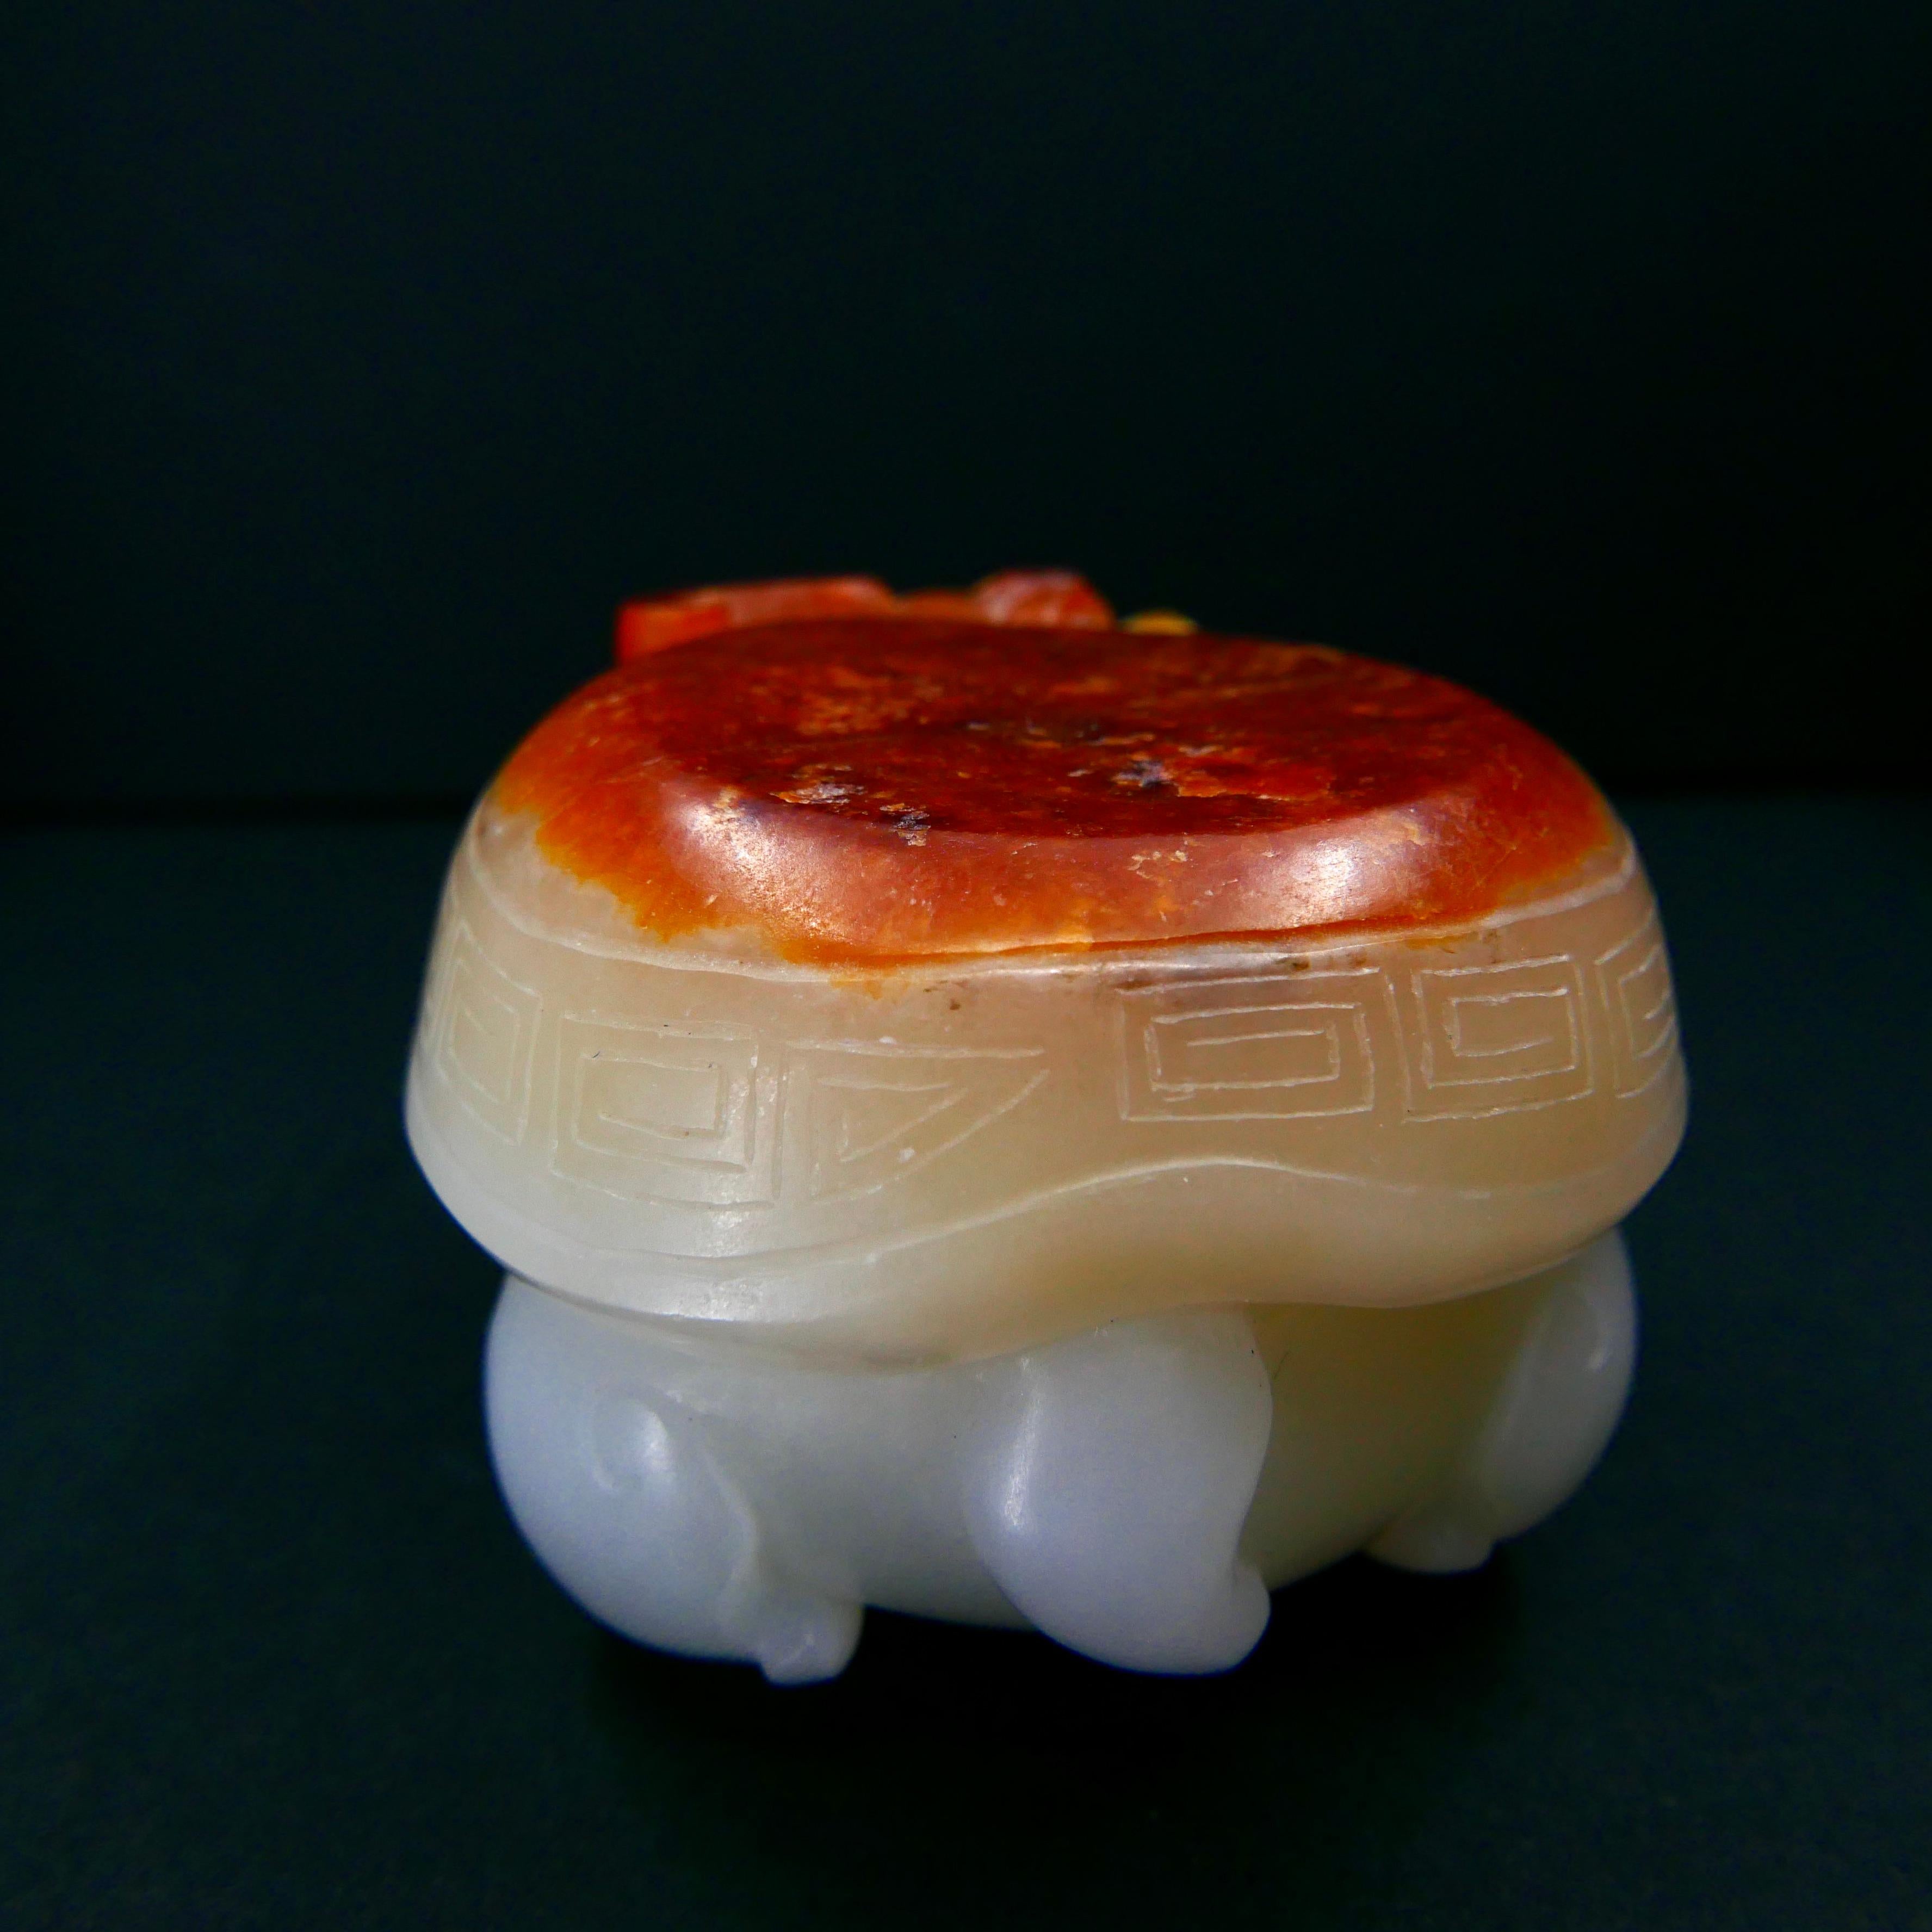 Contemporary Certified Nephrite Jade Mythical Creature, Hetian River Pebble Material For Sale